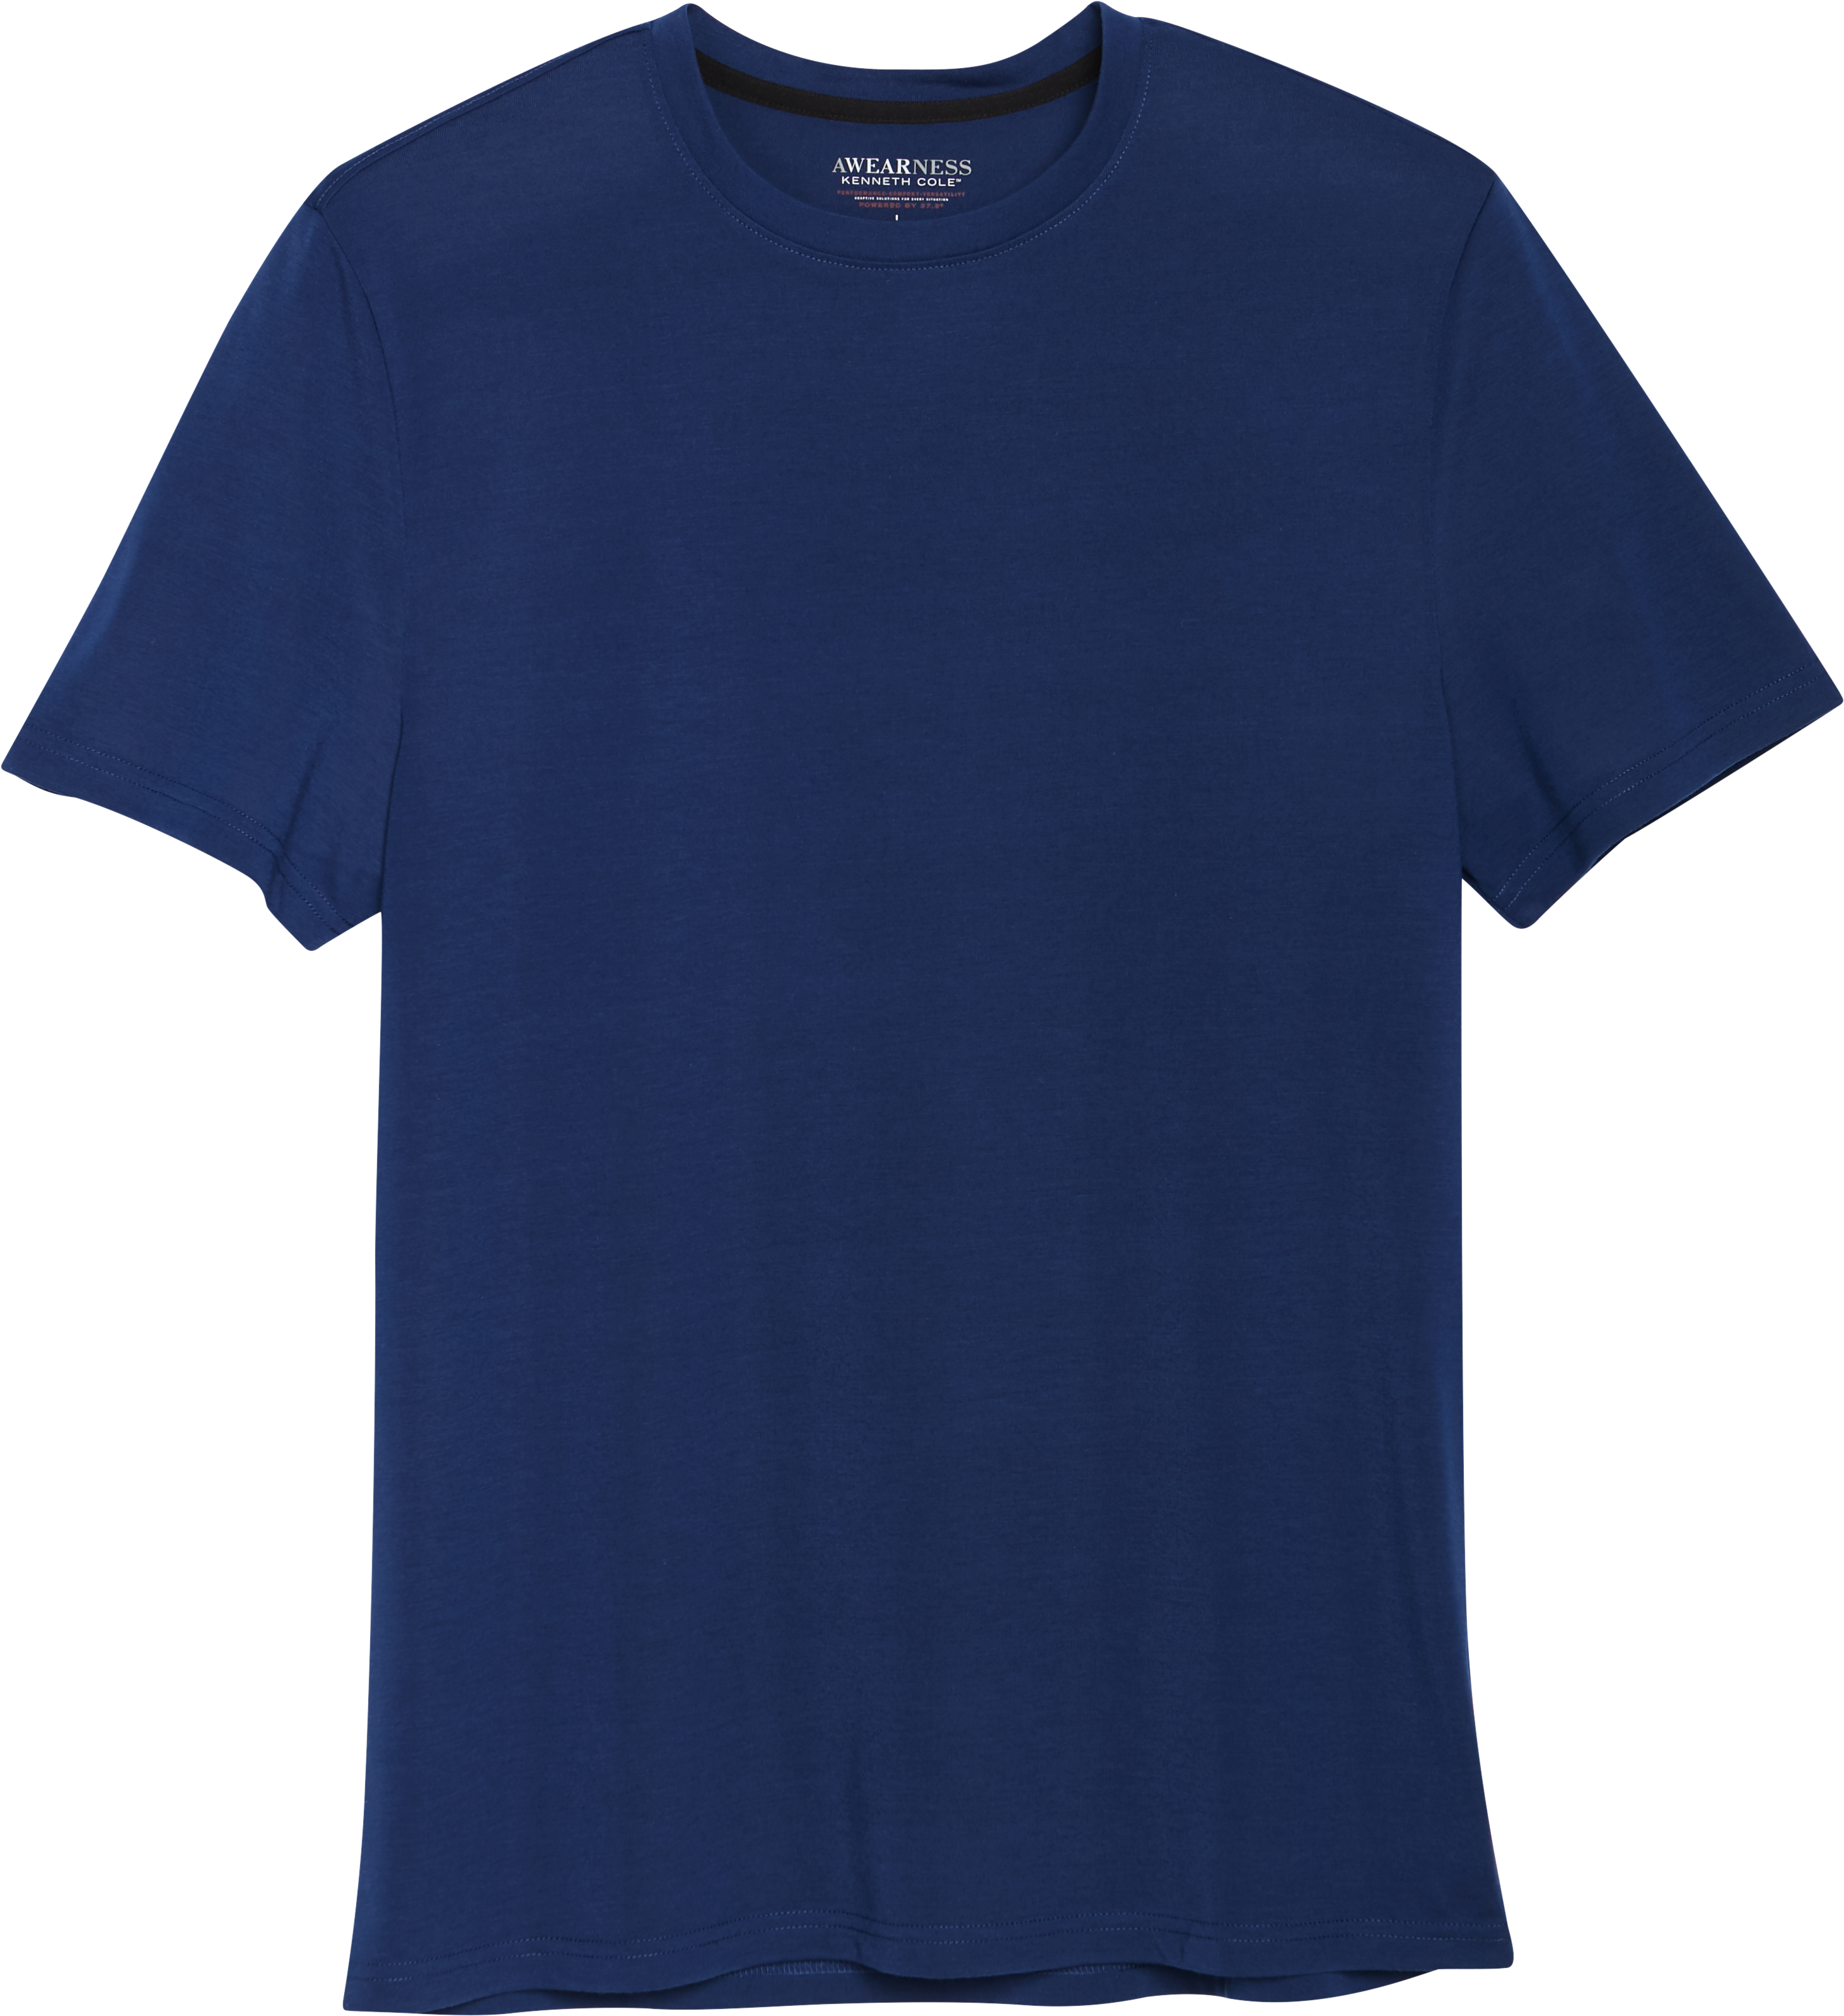 Awearness Kenneth Cole AWEAR-TECH Slim Fit Crew Neck Short Sleeve Tee ...